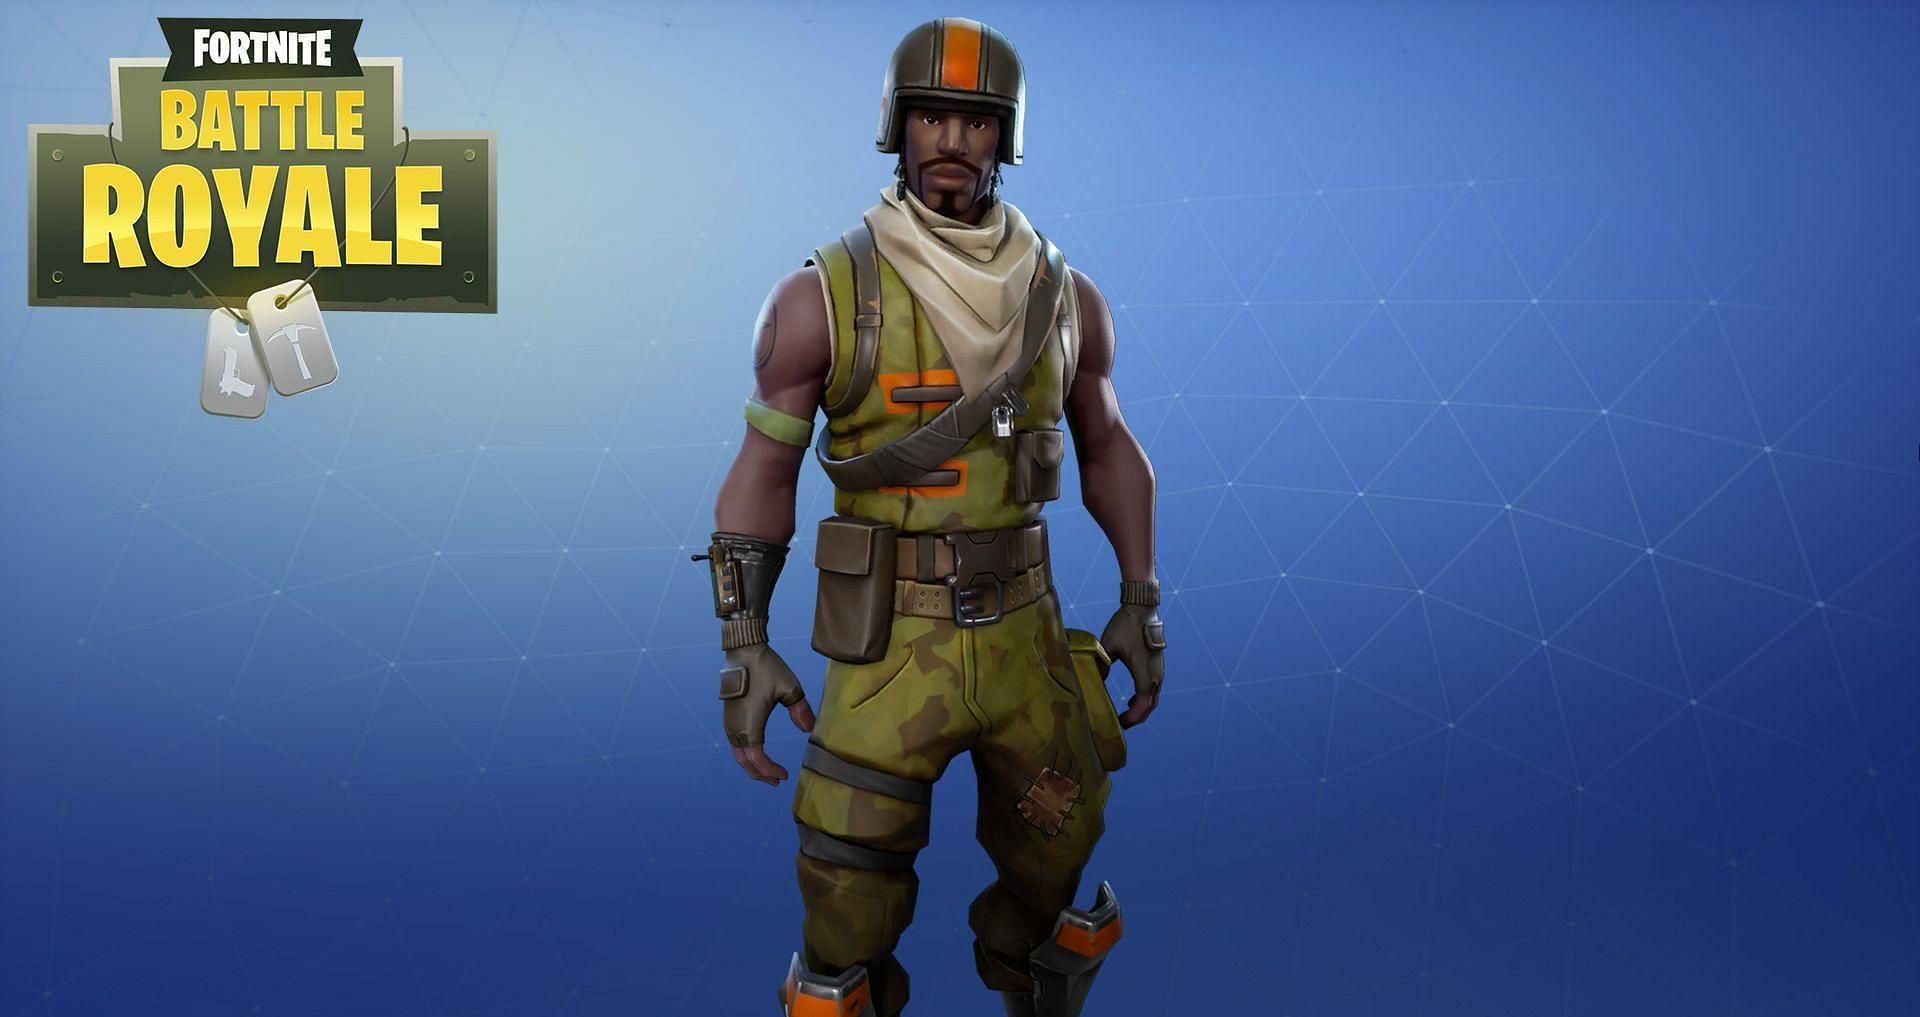 The Aerial Assault Trooper skin is one of the rarest skins in Fortnite (Image via Epic Games)